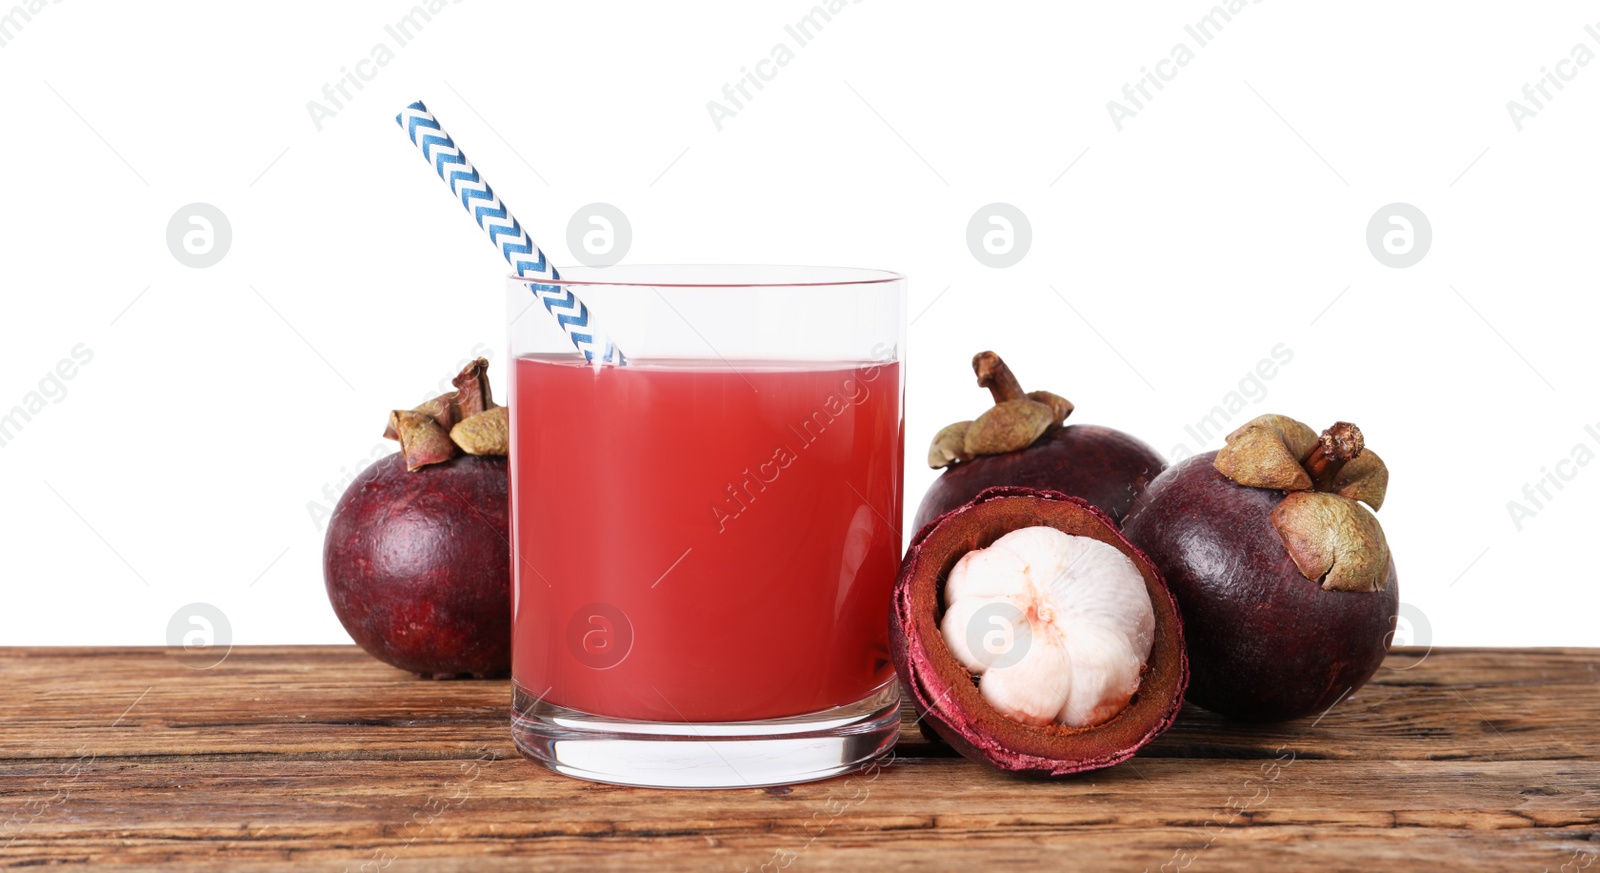 Photo of Delicious mangosteen juice and fresh fruits on wooden table against white background